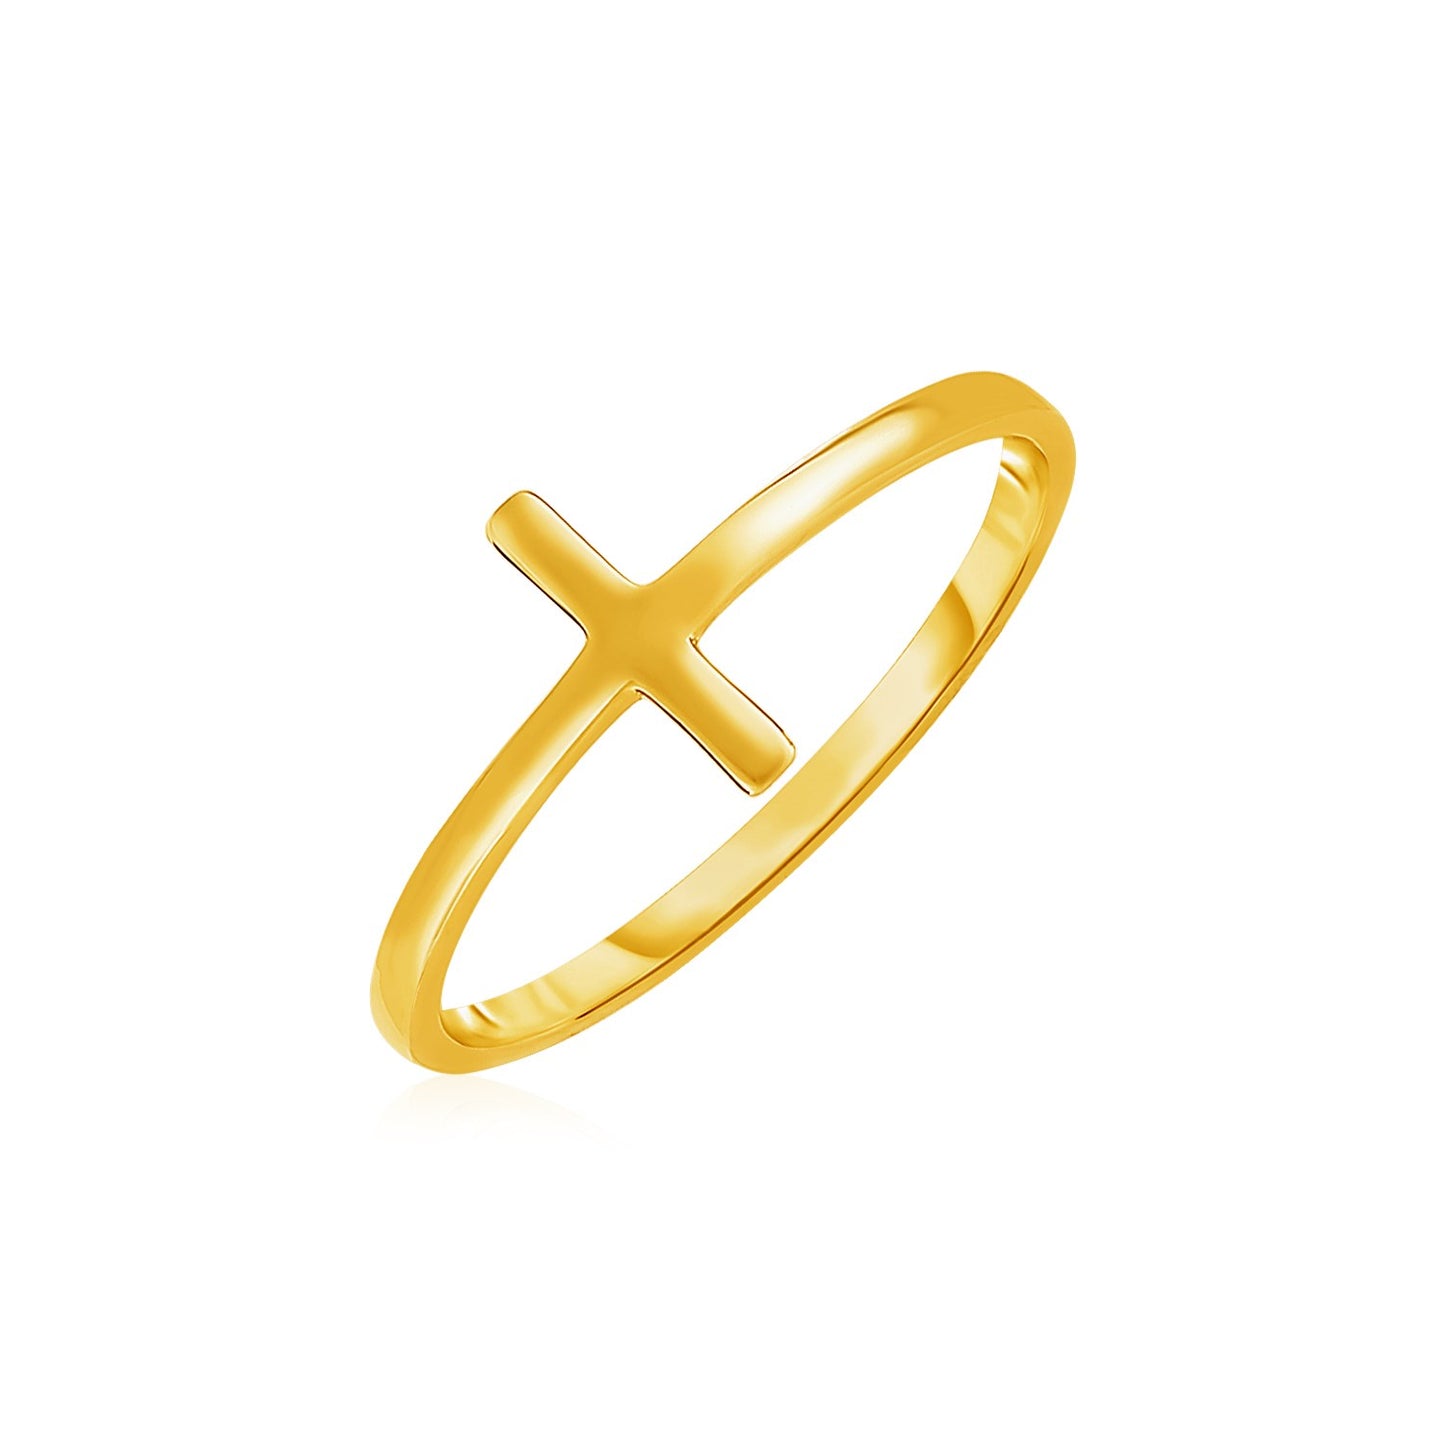  Gold T Ring